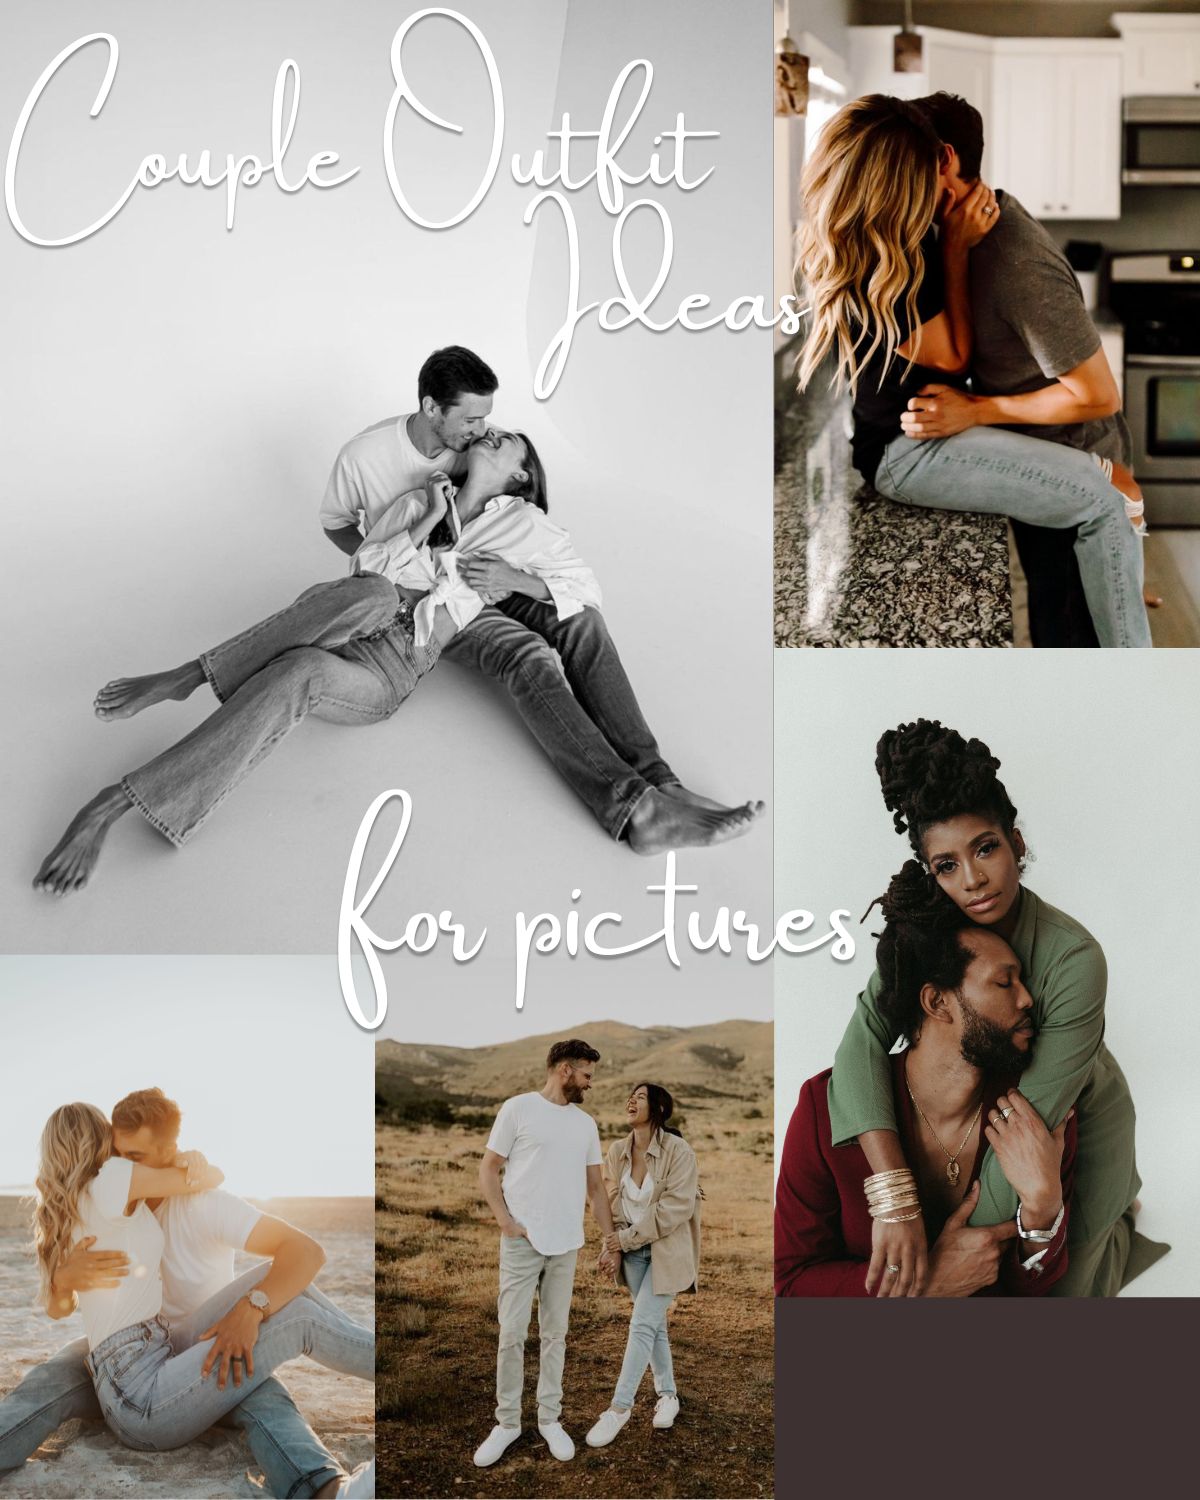 Five couple outfit ideas for pictures and photoshoot examples